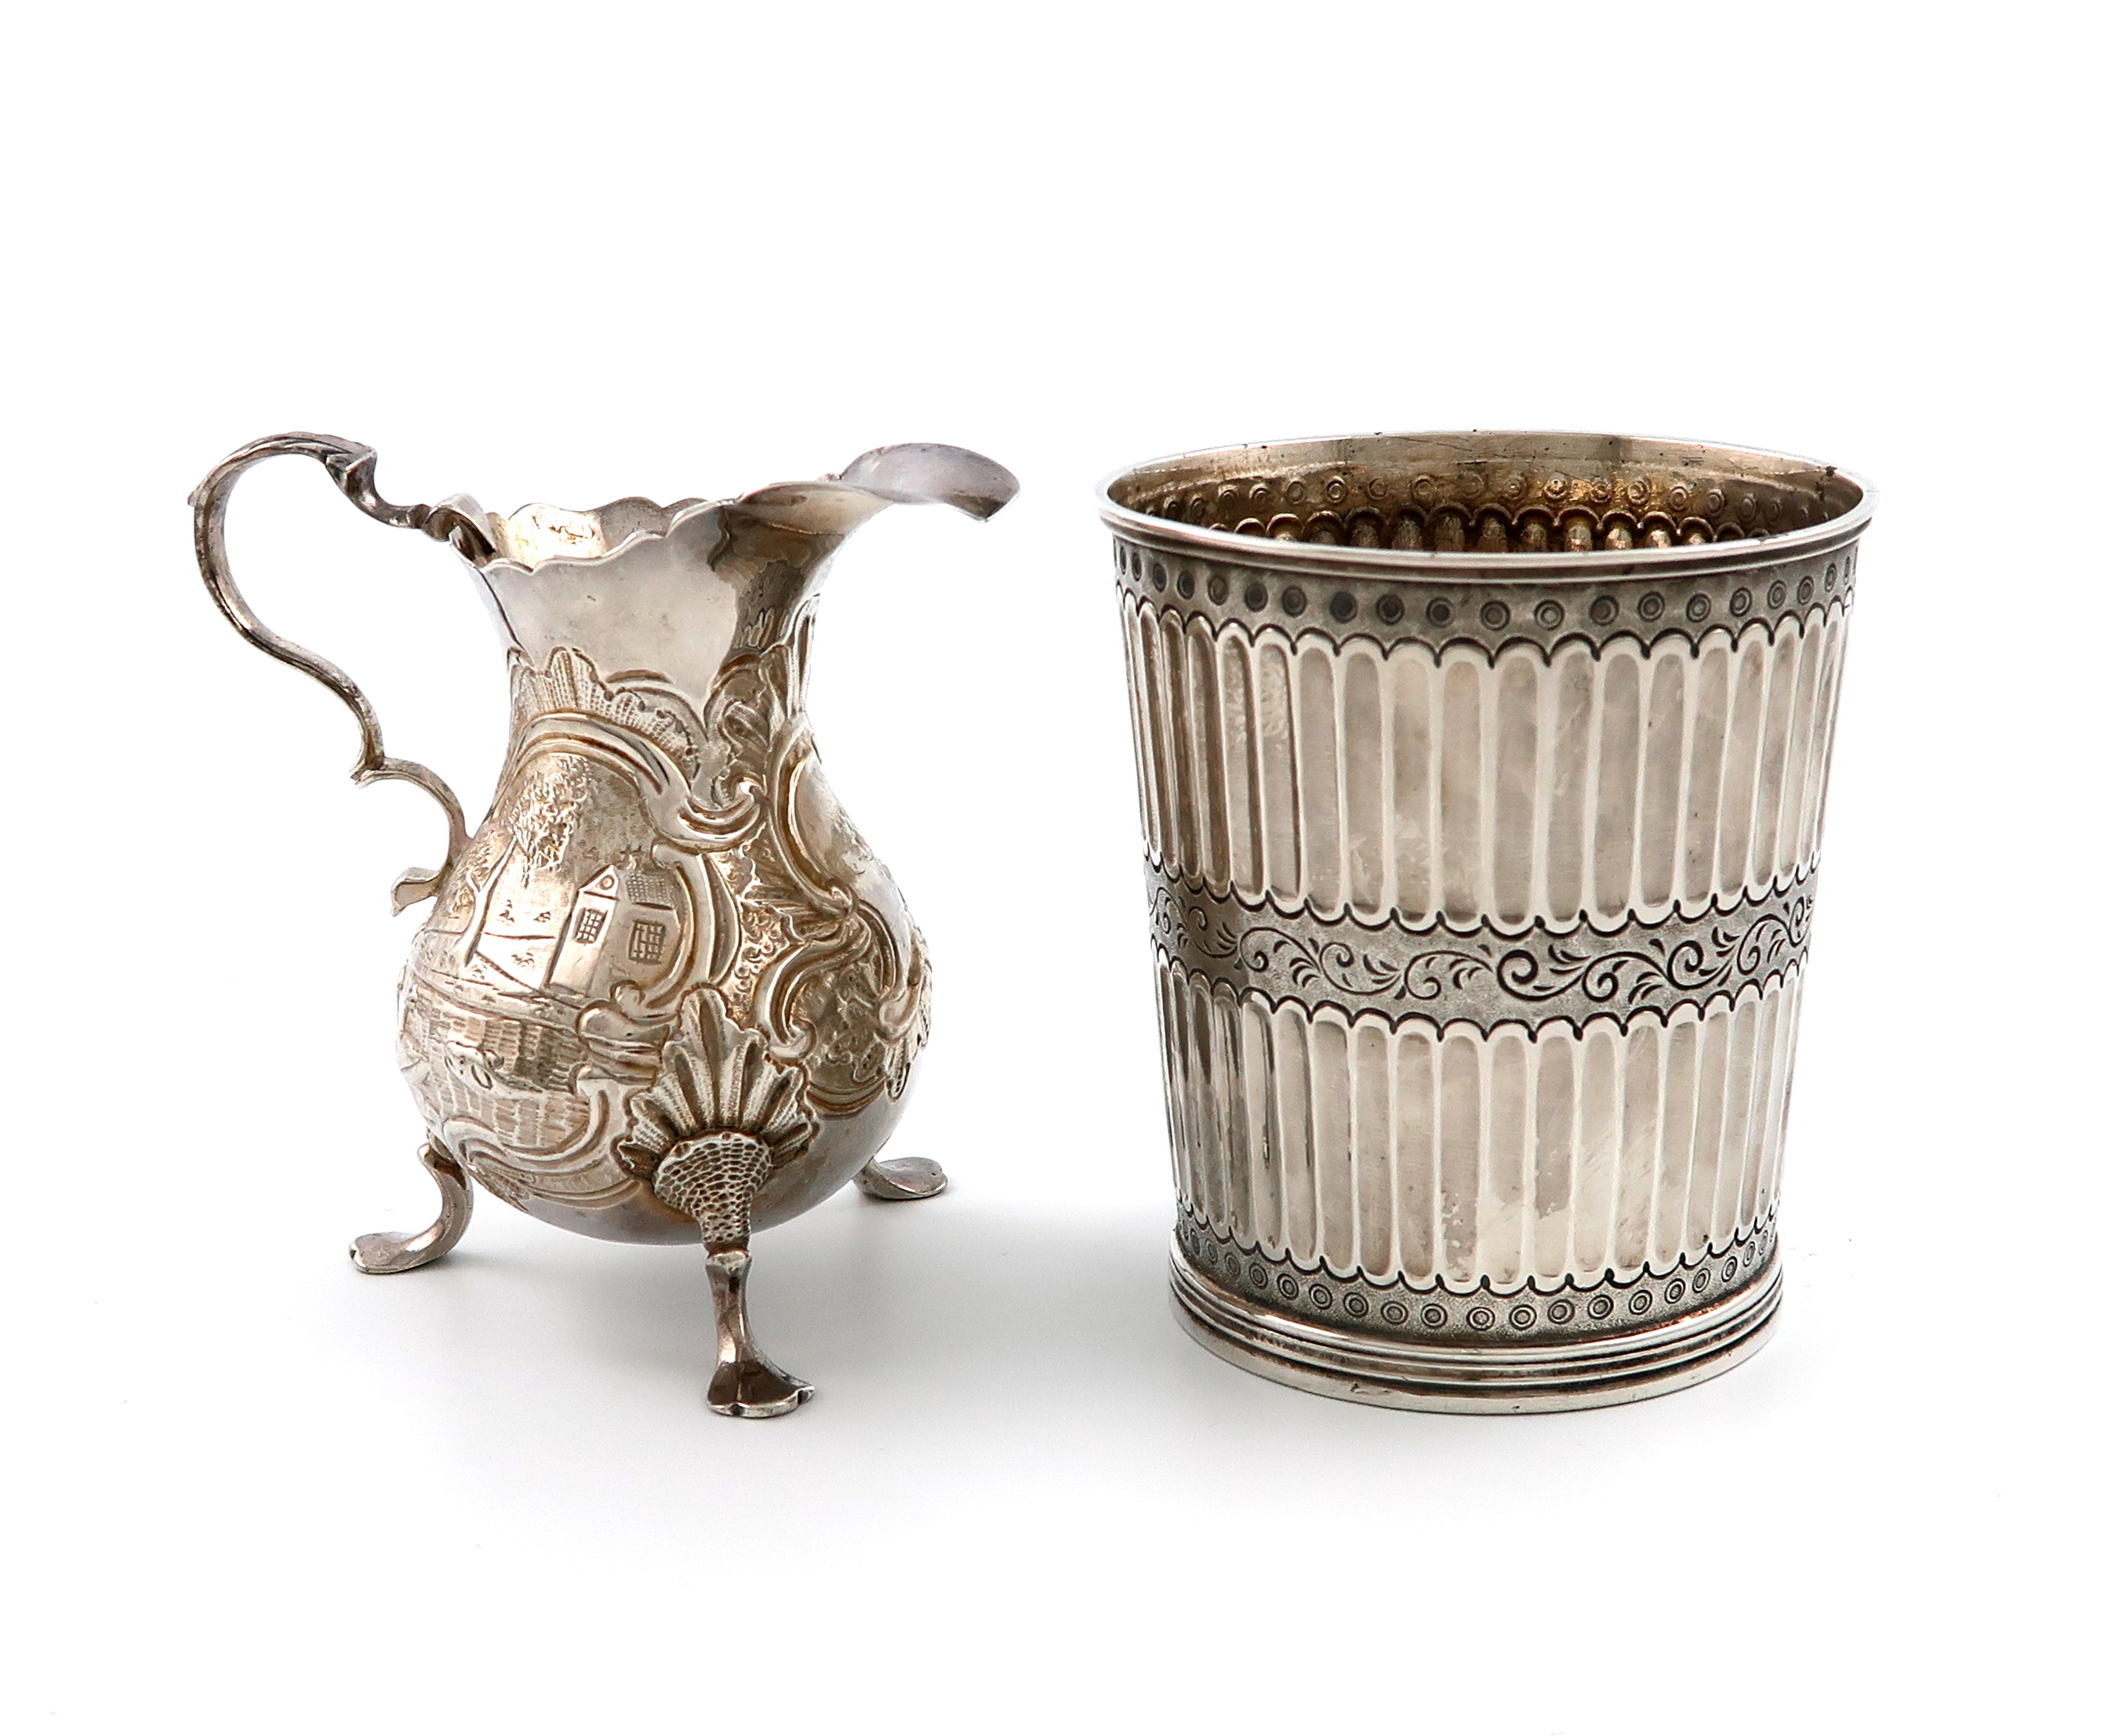 A George II silver cream jug, maker's mark W?, London 1744, baluster form, embossed with animals and